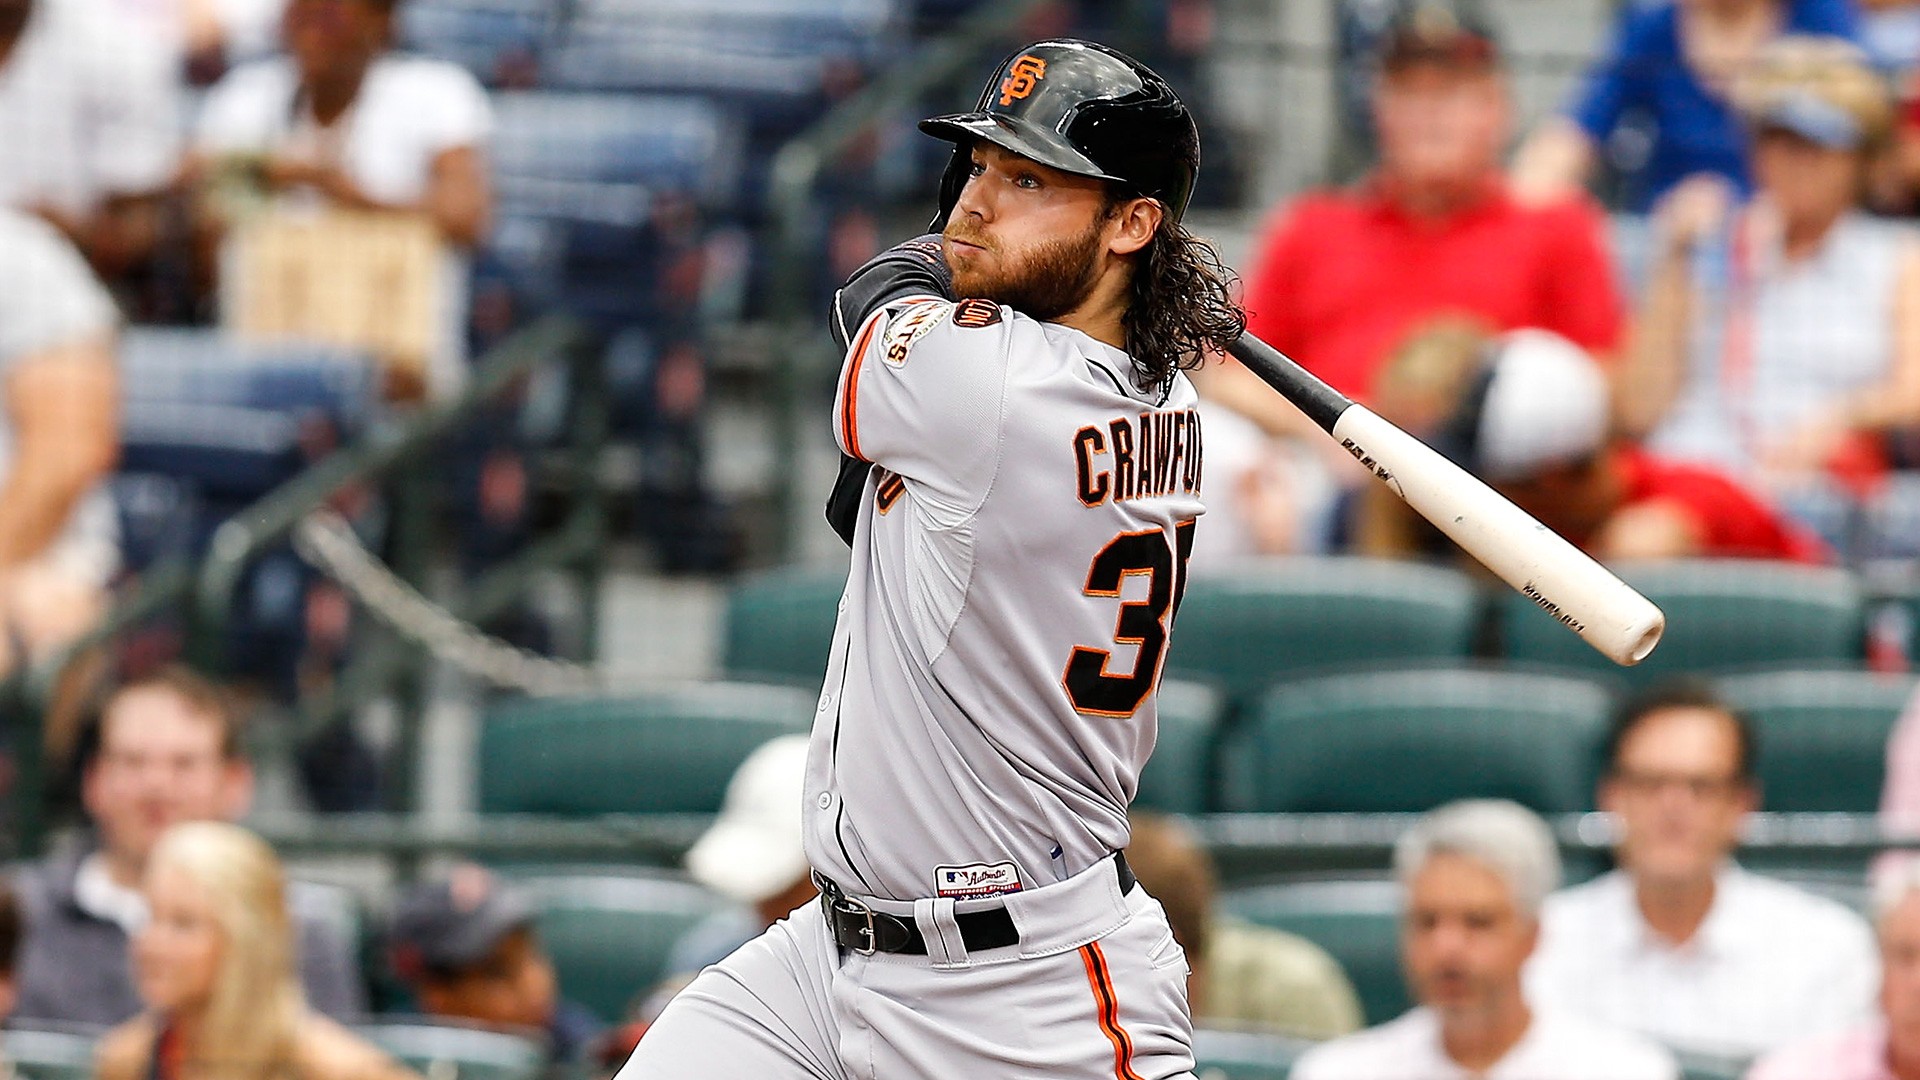 Giants' Brandon Crawford was better than everyone else Monday